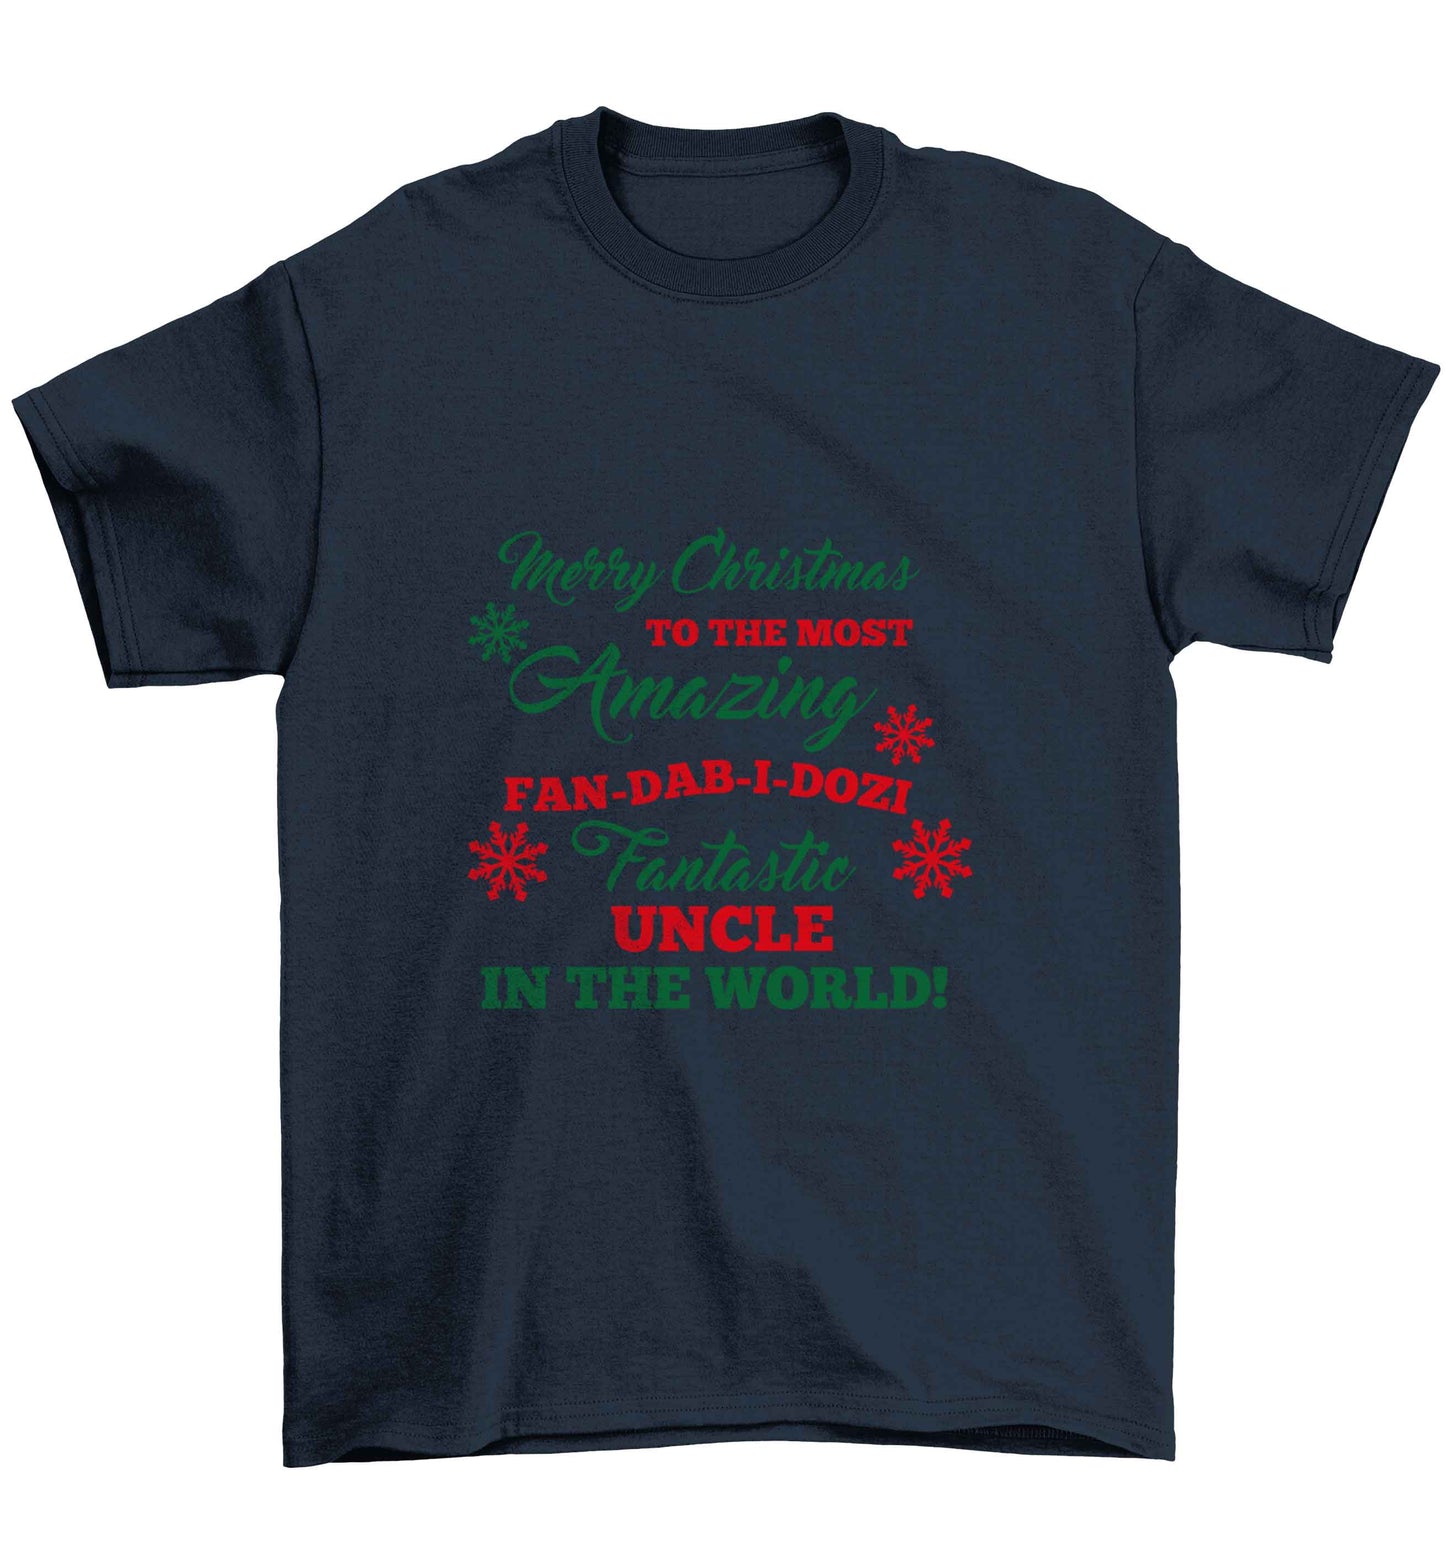 Merry Christmas to the most amazing fan-dab-i-dozi fantasic Uncle in the world Children's navy Tshirt 12-13 Years